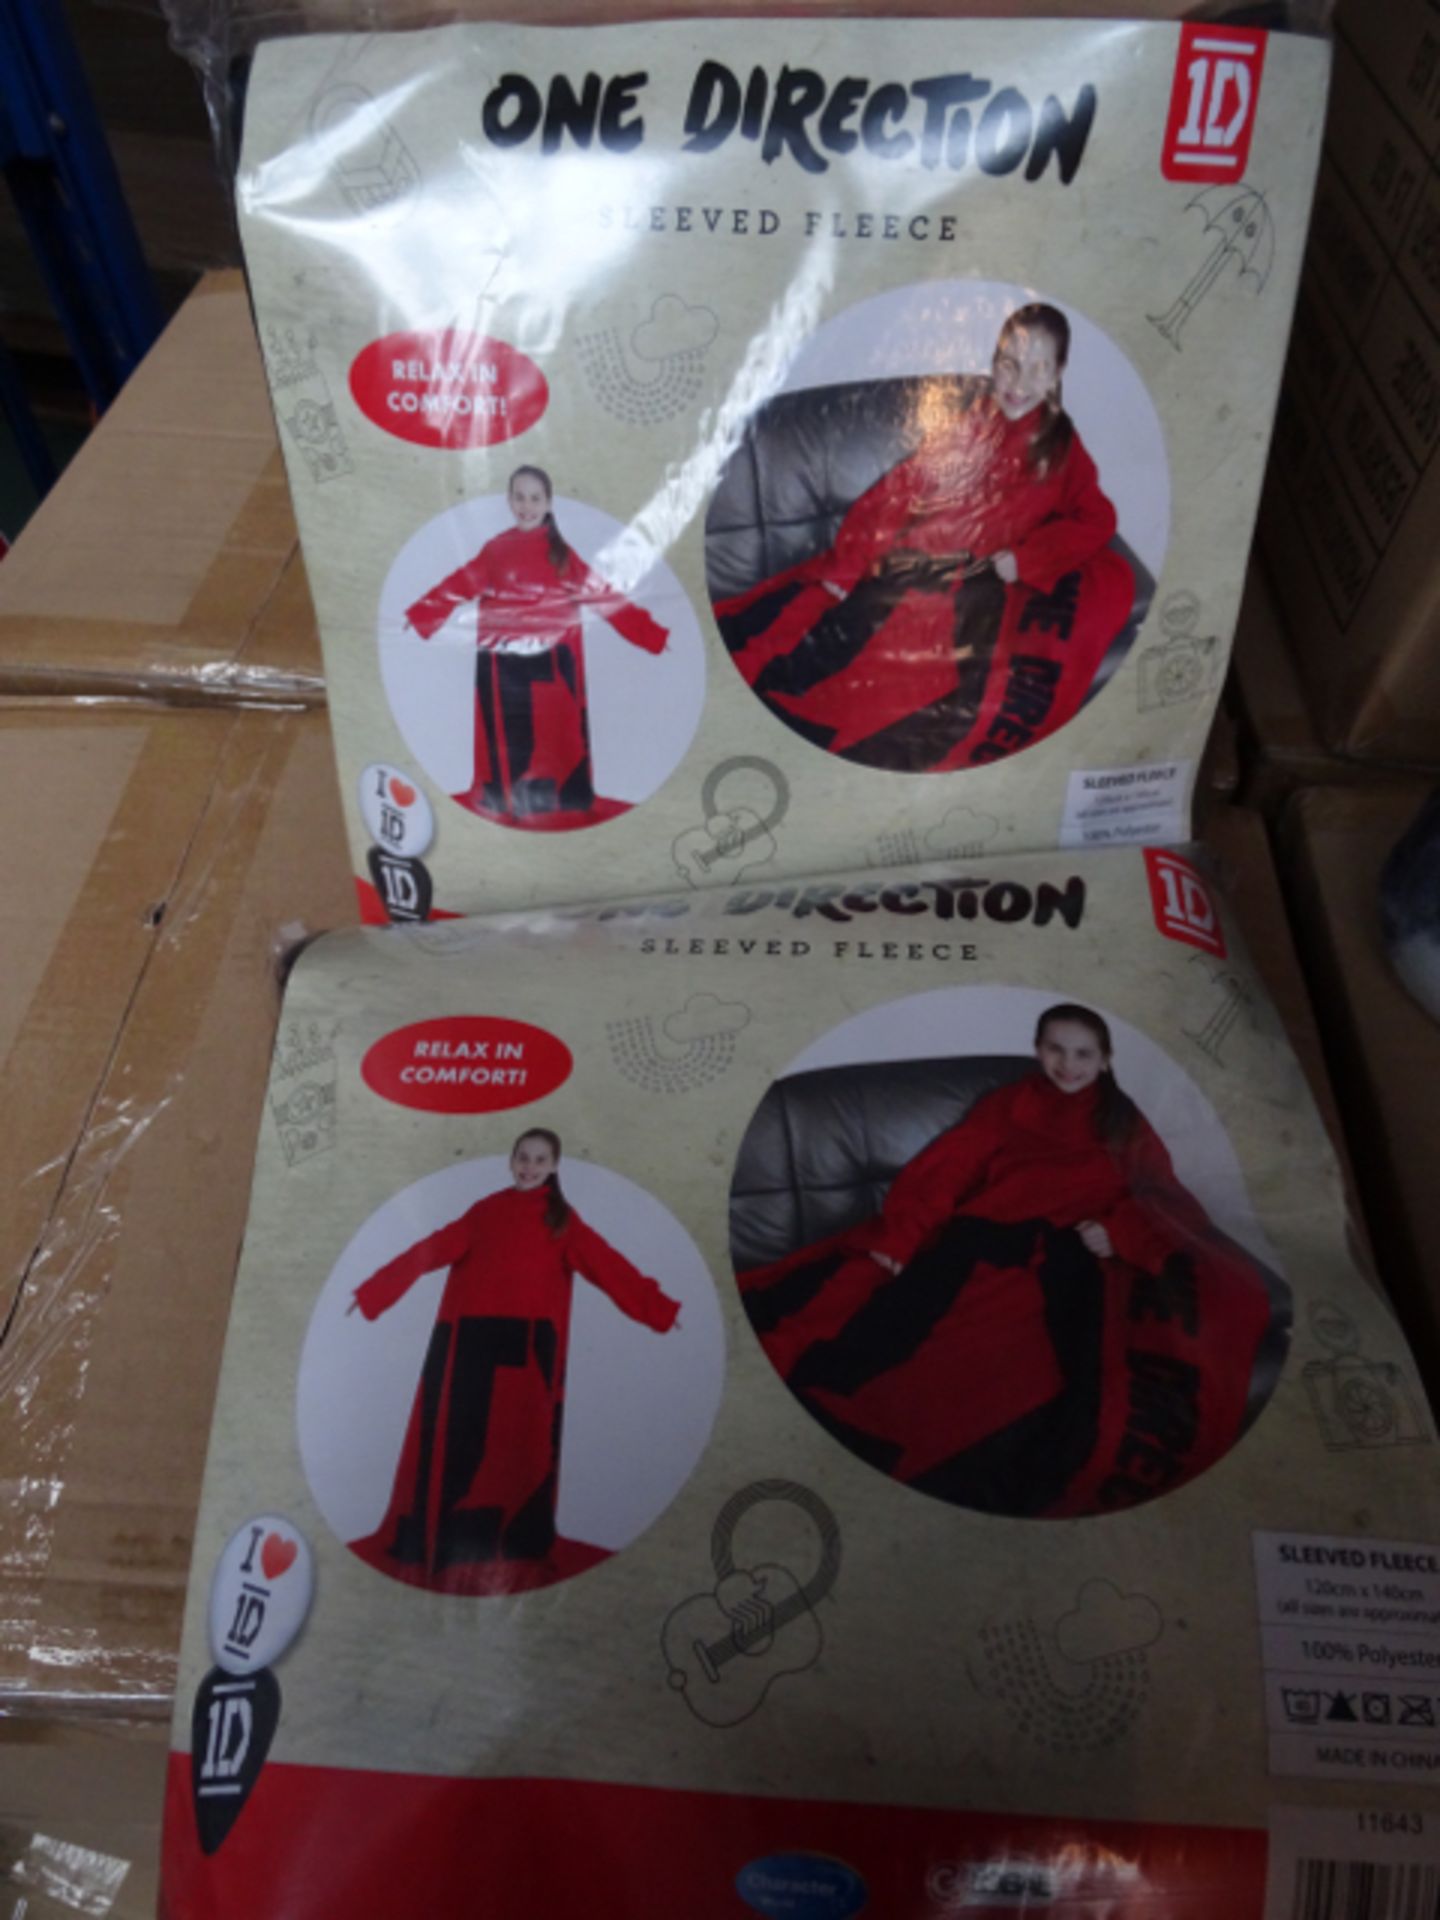 12 x One Direction Sleeved Fleece. 'Relax in comfort' 120cm x 140cm. High retail value. Brand new